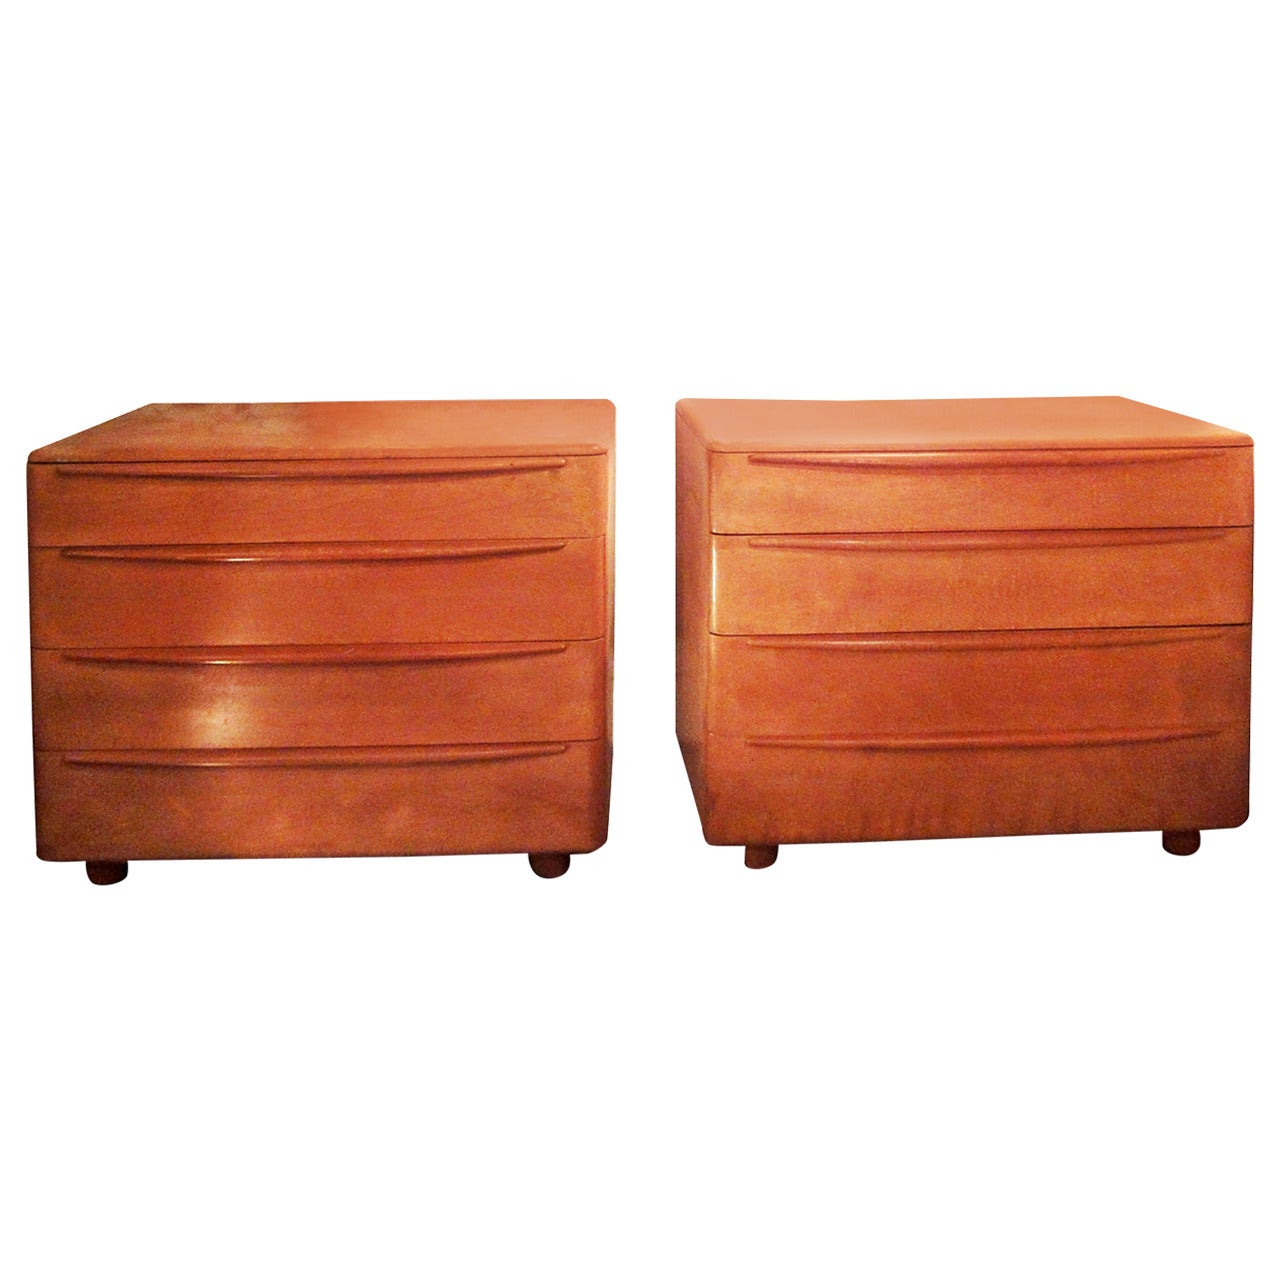 Pair of Commodes by Heywood Wakefield For Sale